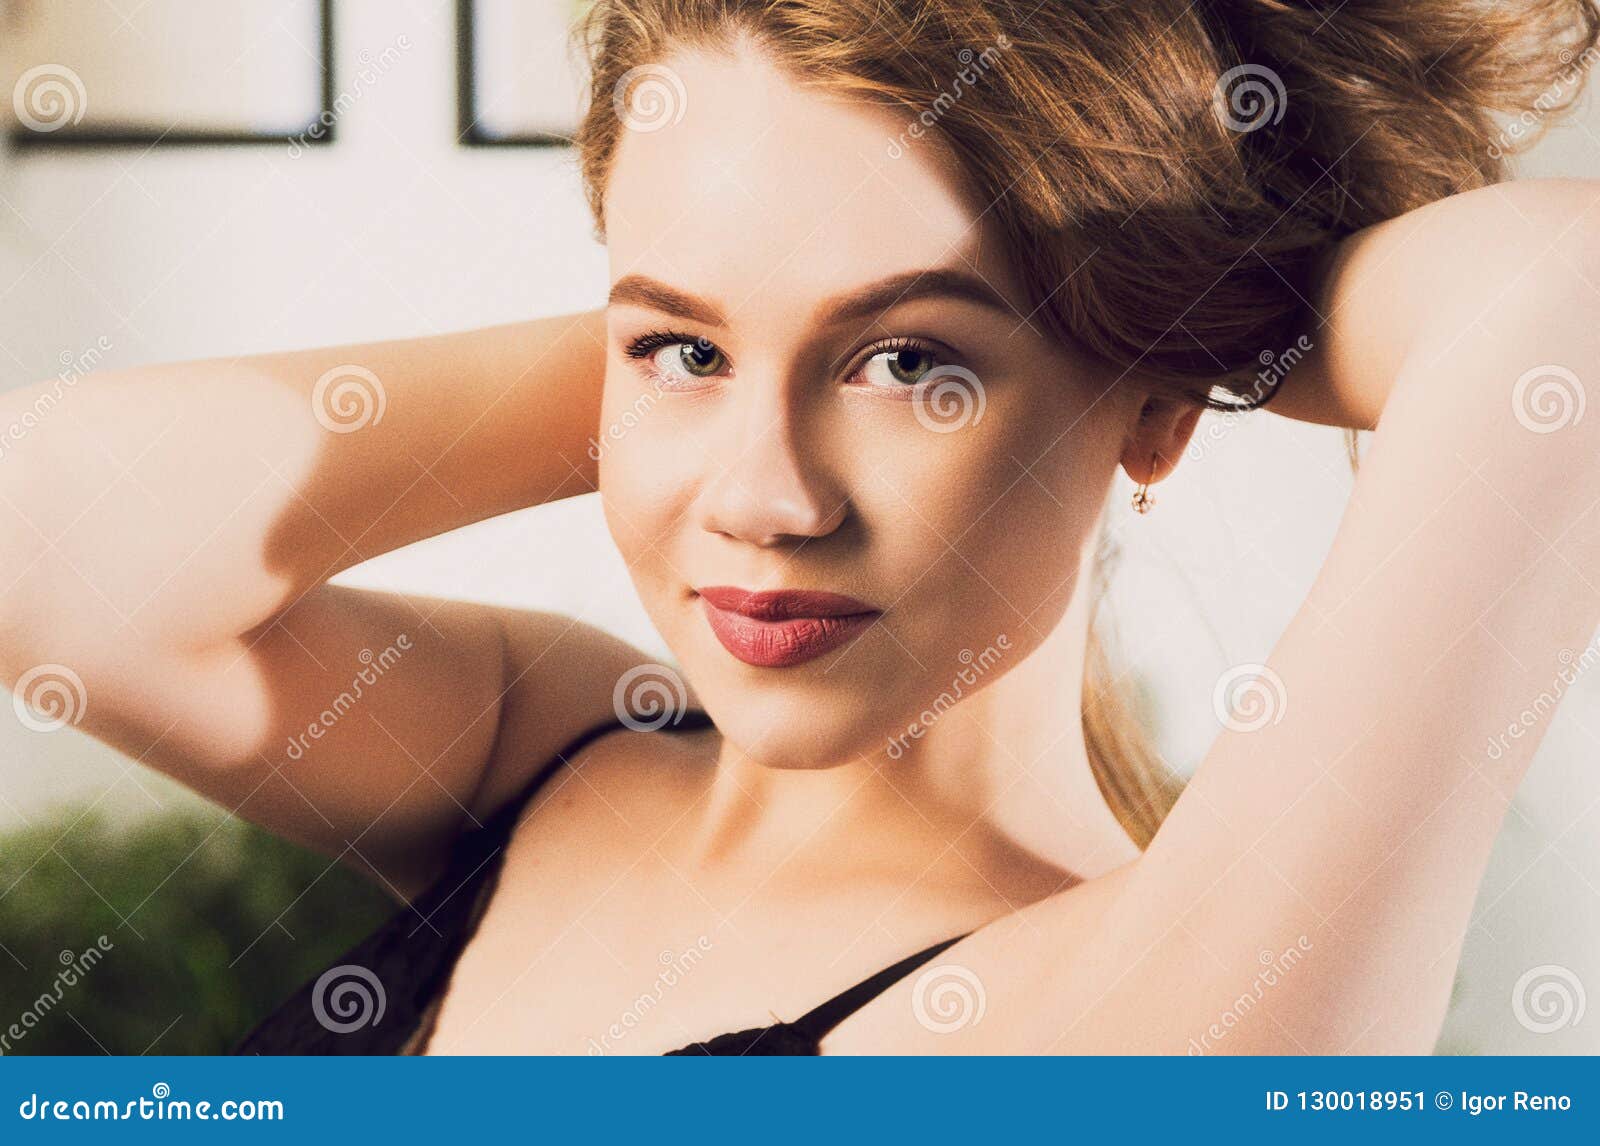 hot young woman looking in camera